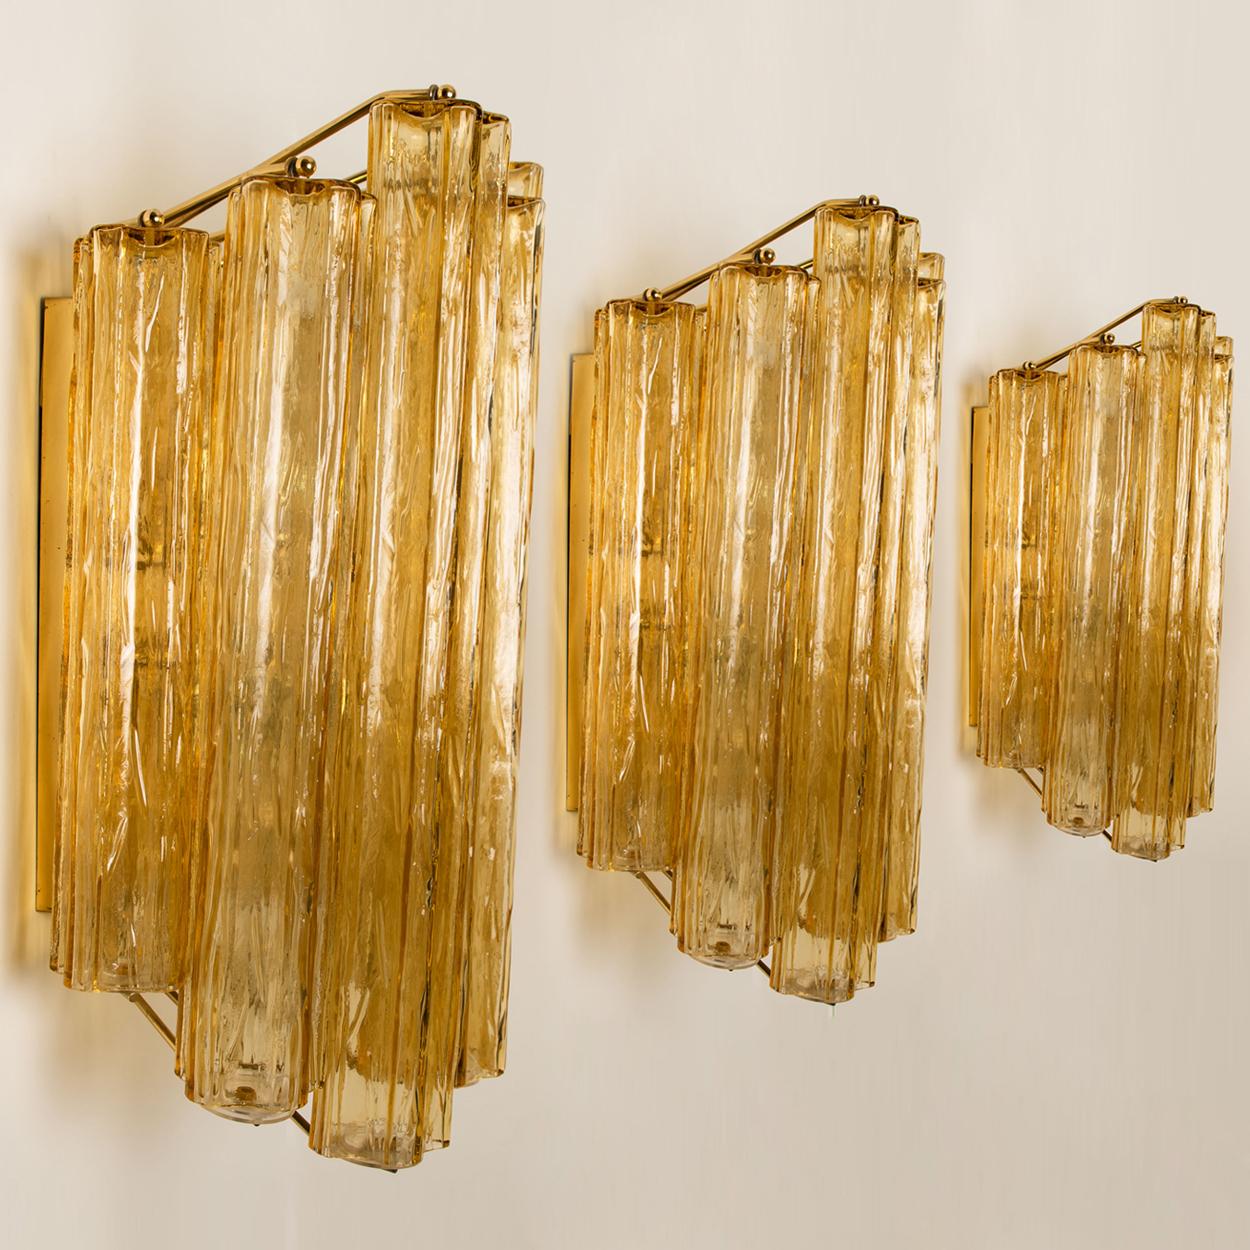 Italian 1 of the 3 Extra Large Wall Sconces or Wall Lights Murano Glass, Barovier & Toso